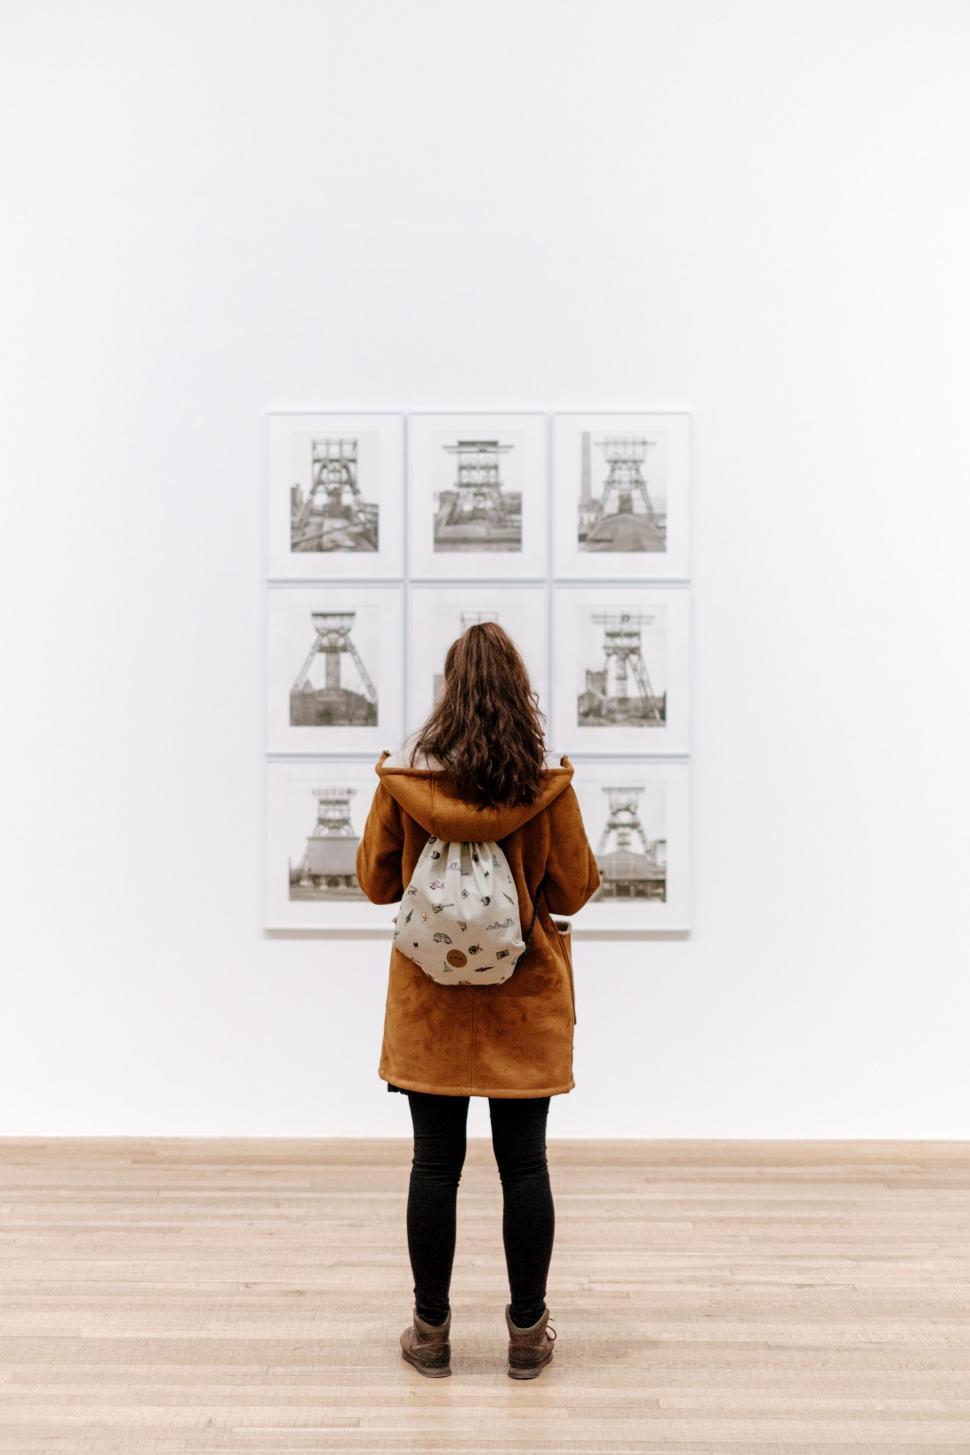 Free Image of Woman Standing in Front of Wall With Pictures 